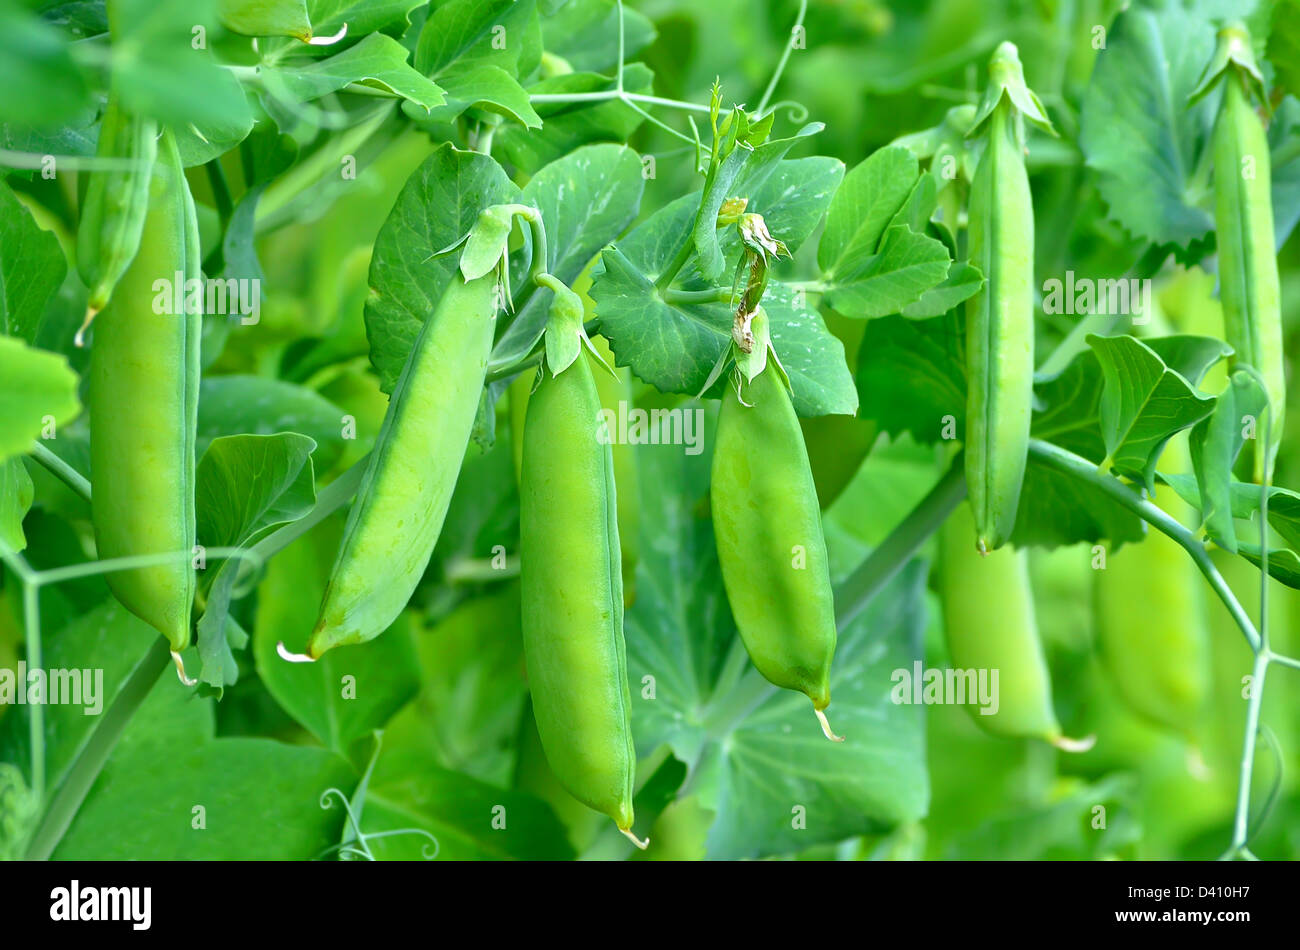 The green peas in the vegetable garden Stock Photo